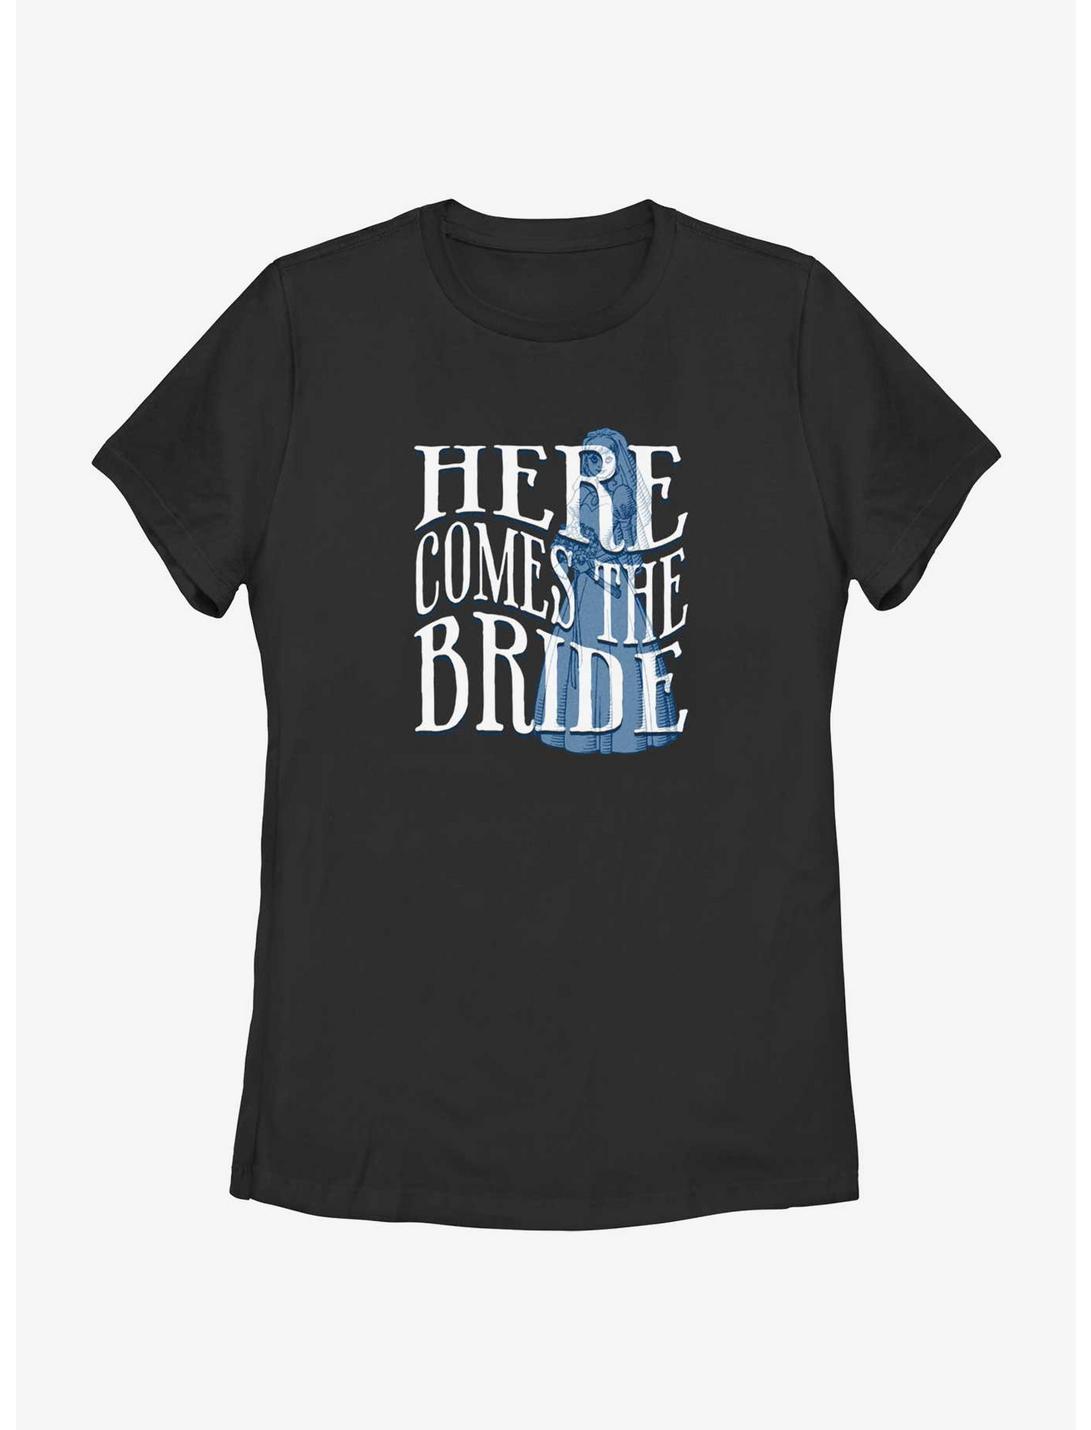 Disney Haunted Mansion Here Comes The Ghost Bride Womens T-Shirt, BLACK, hi-res